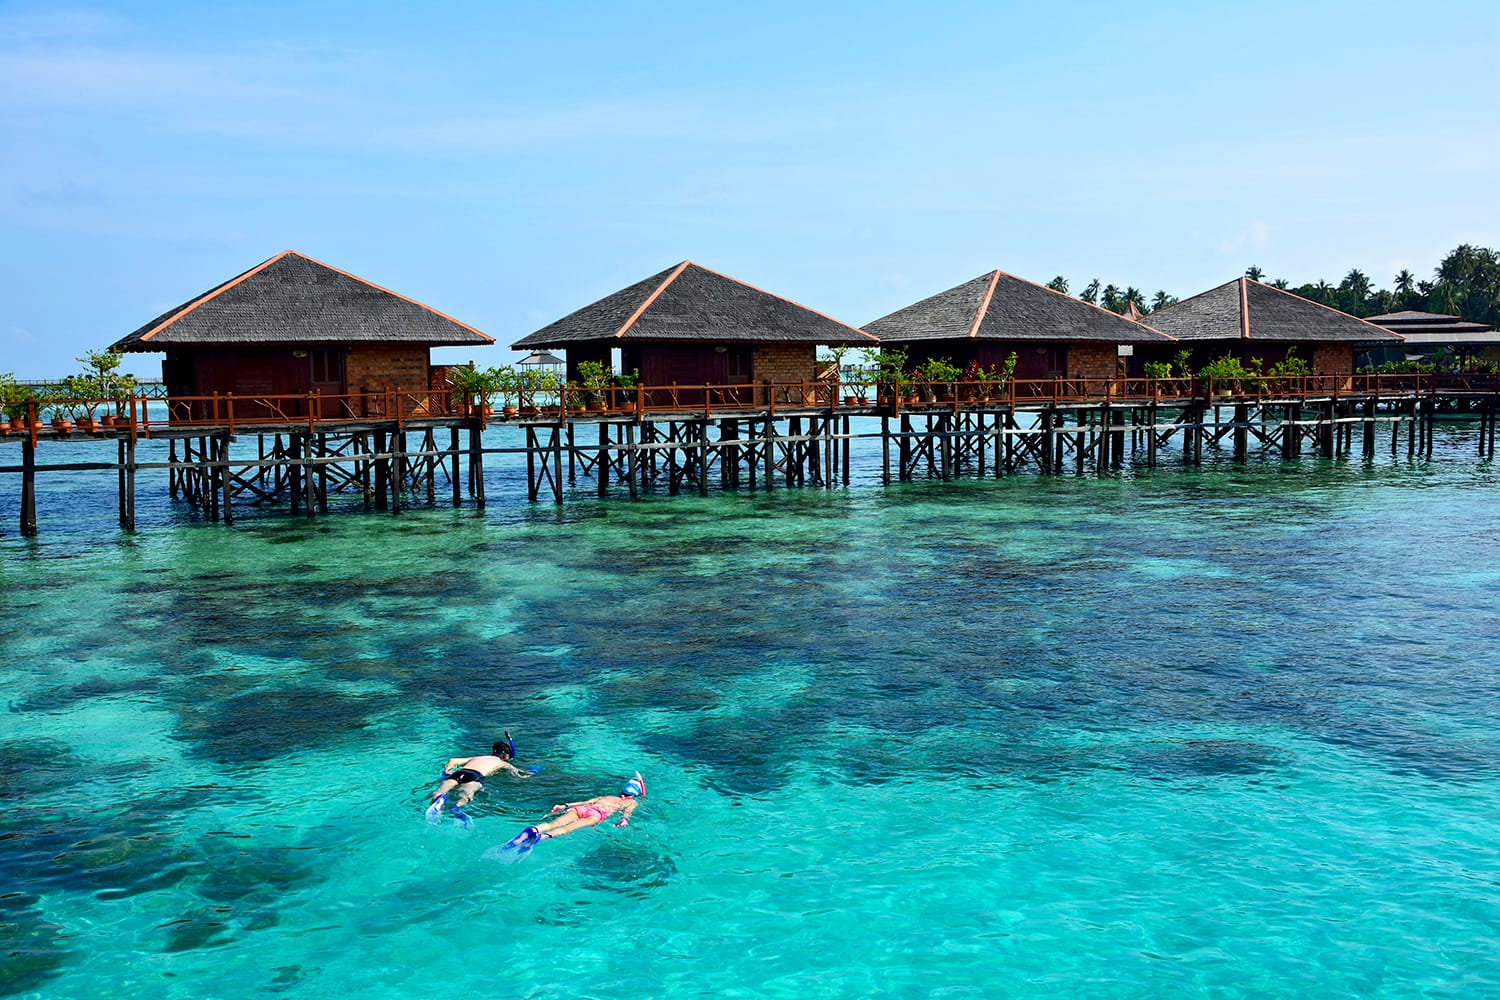 Snorkeling tourists in the ocean at Mabul island, Malaysia - Image